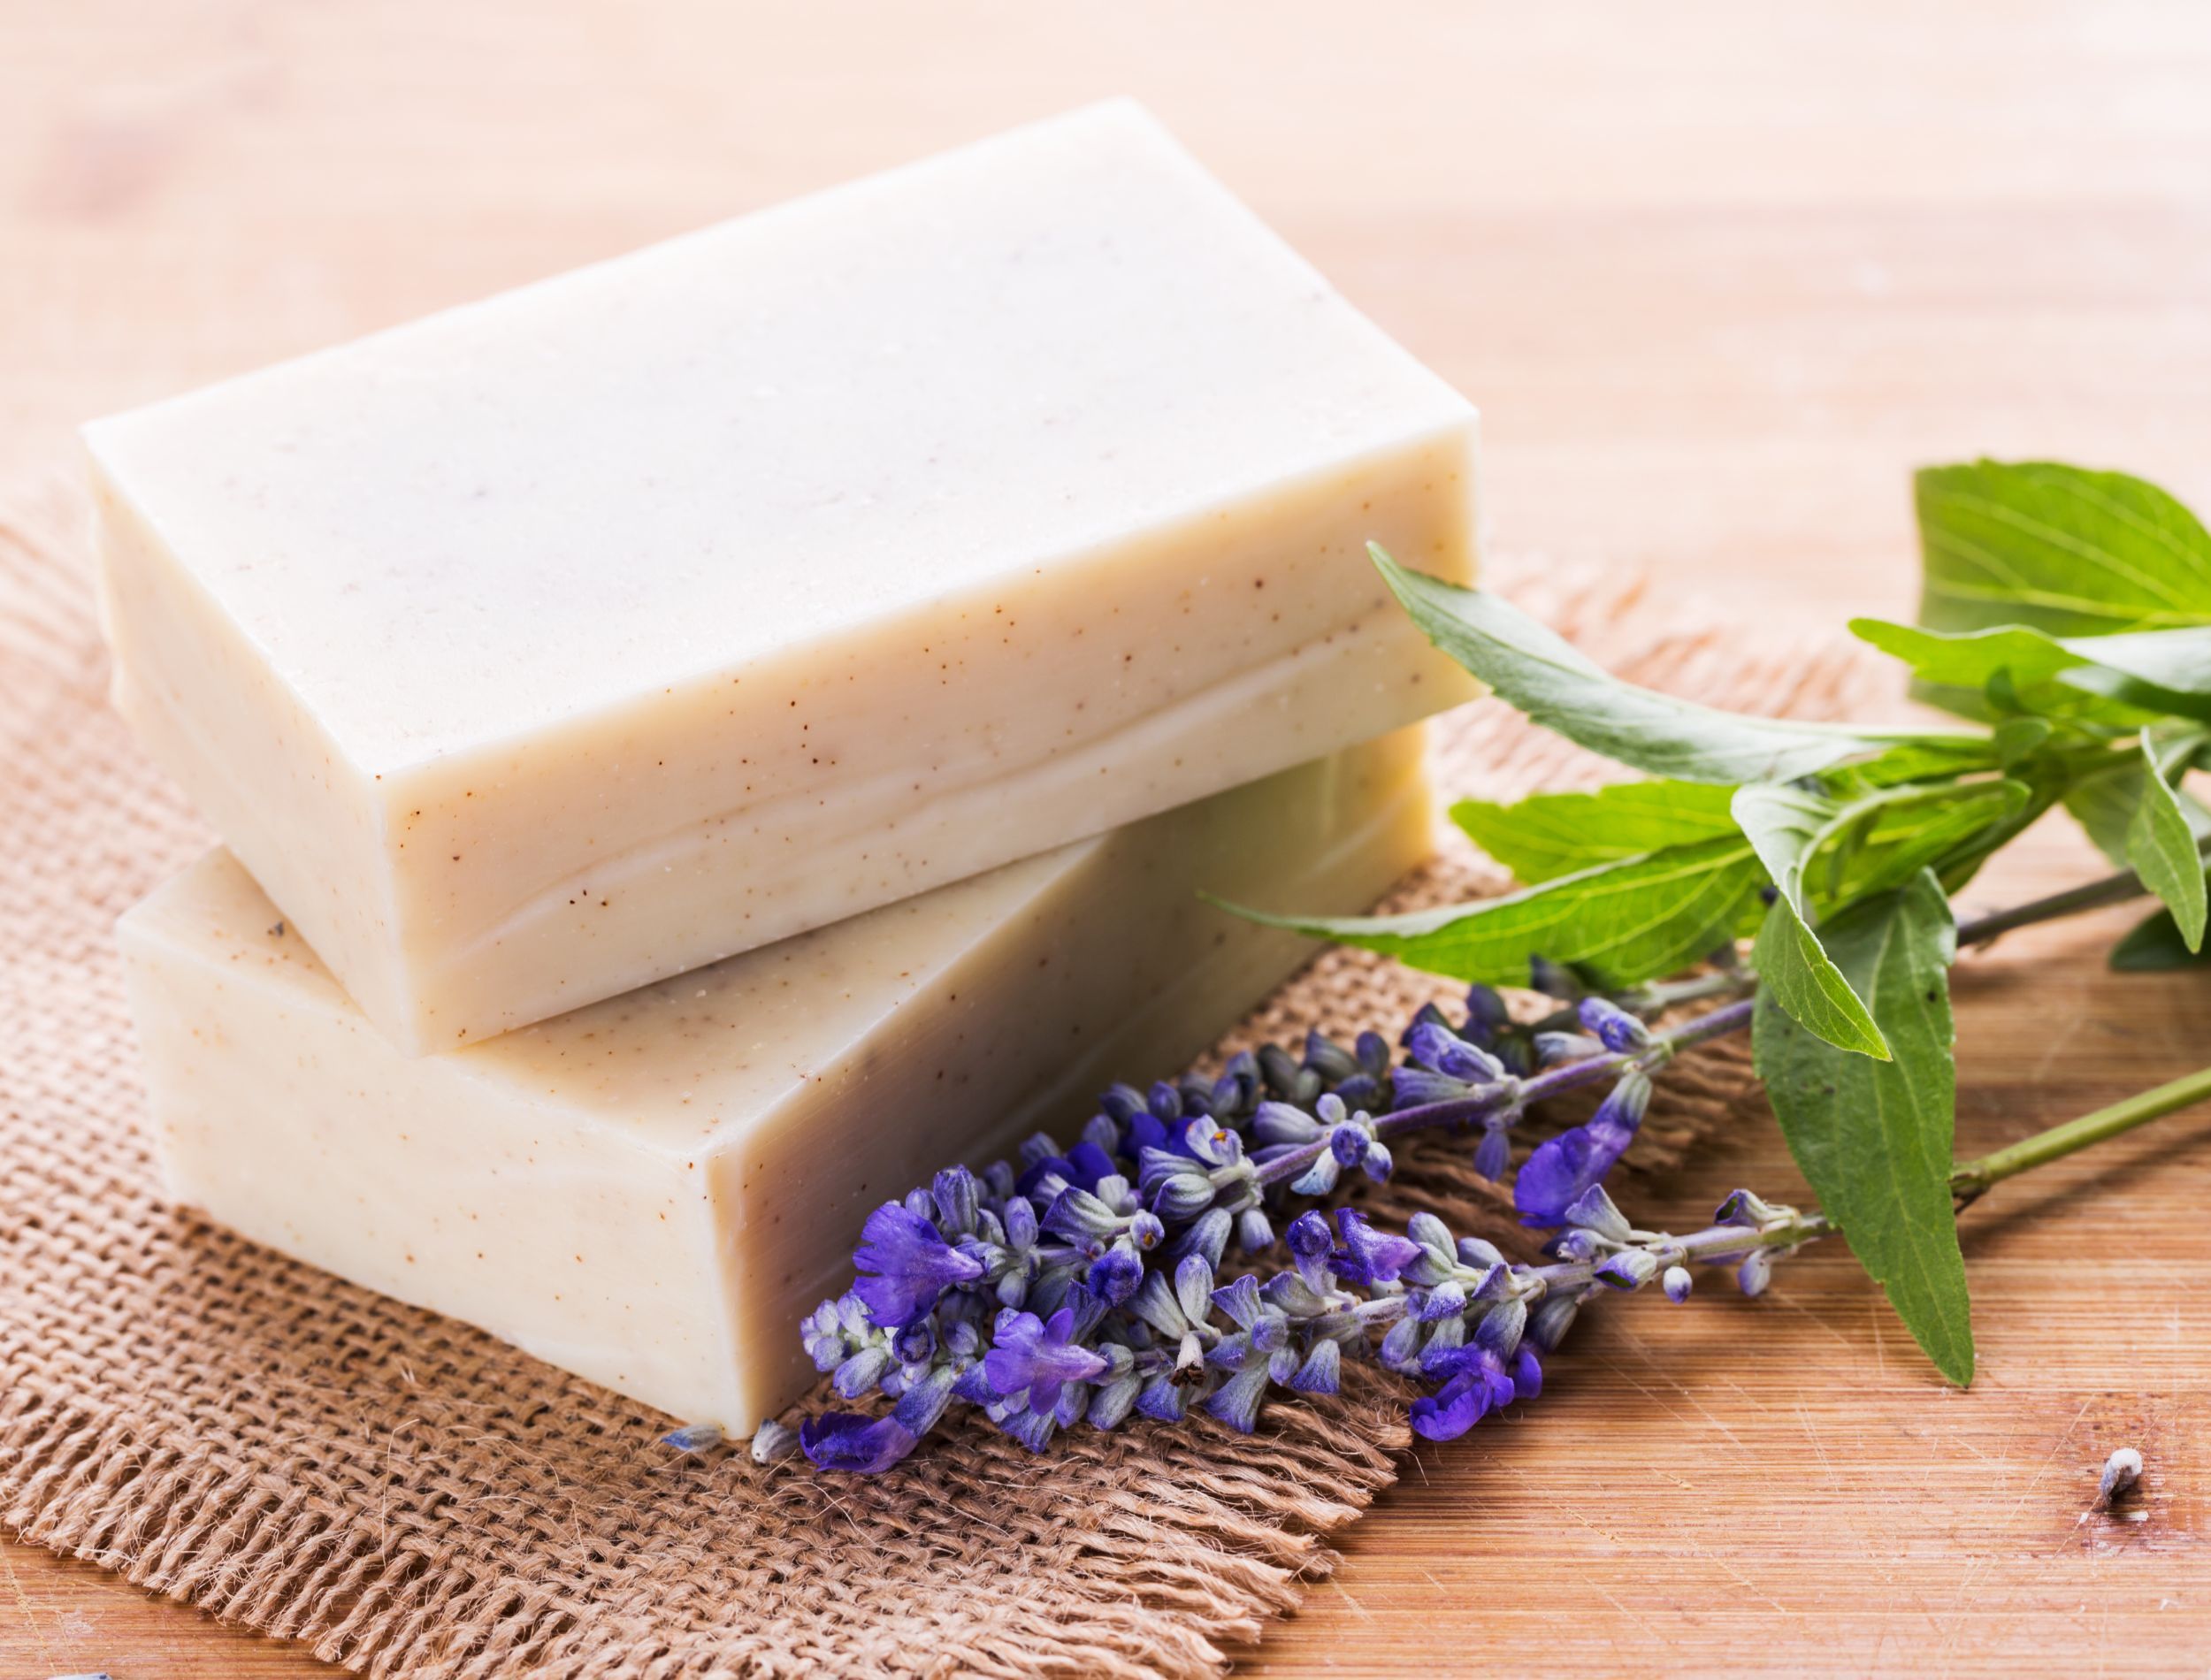 Organic bars of soap next to lavender